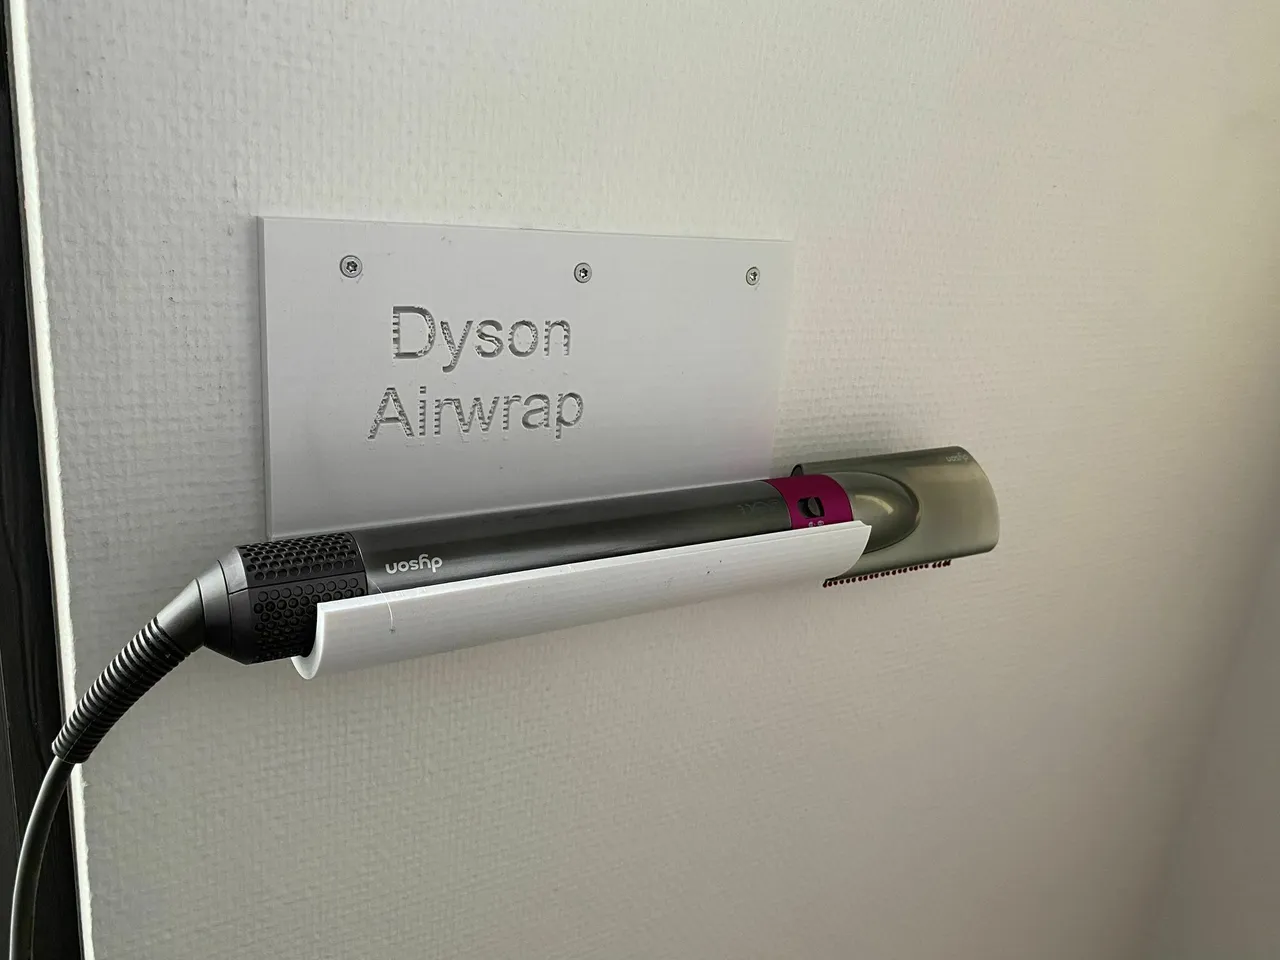 Support Dyson Airwrap